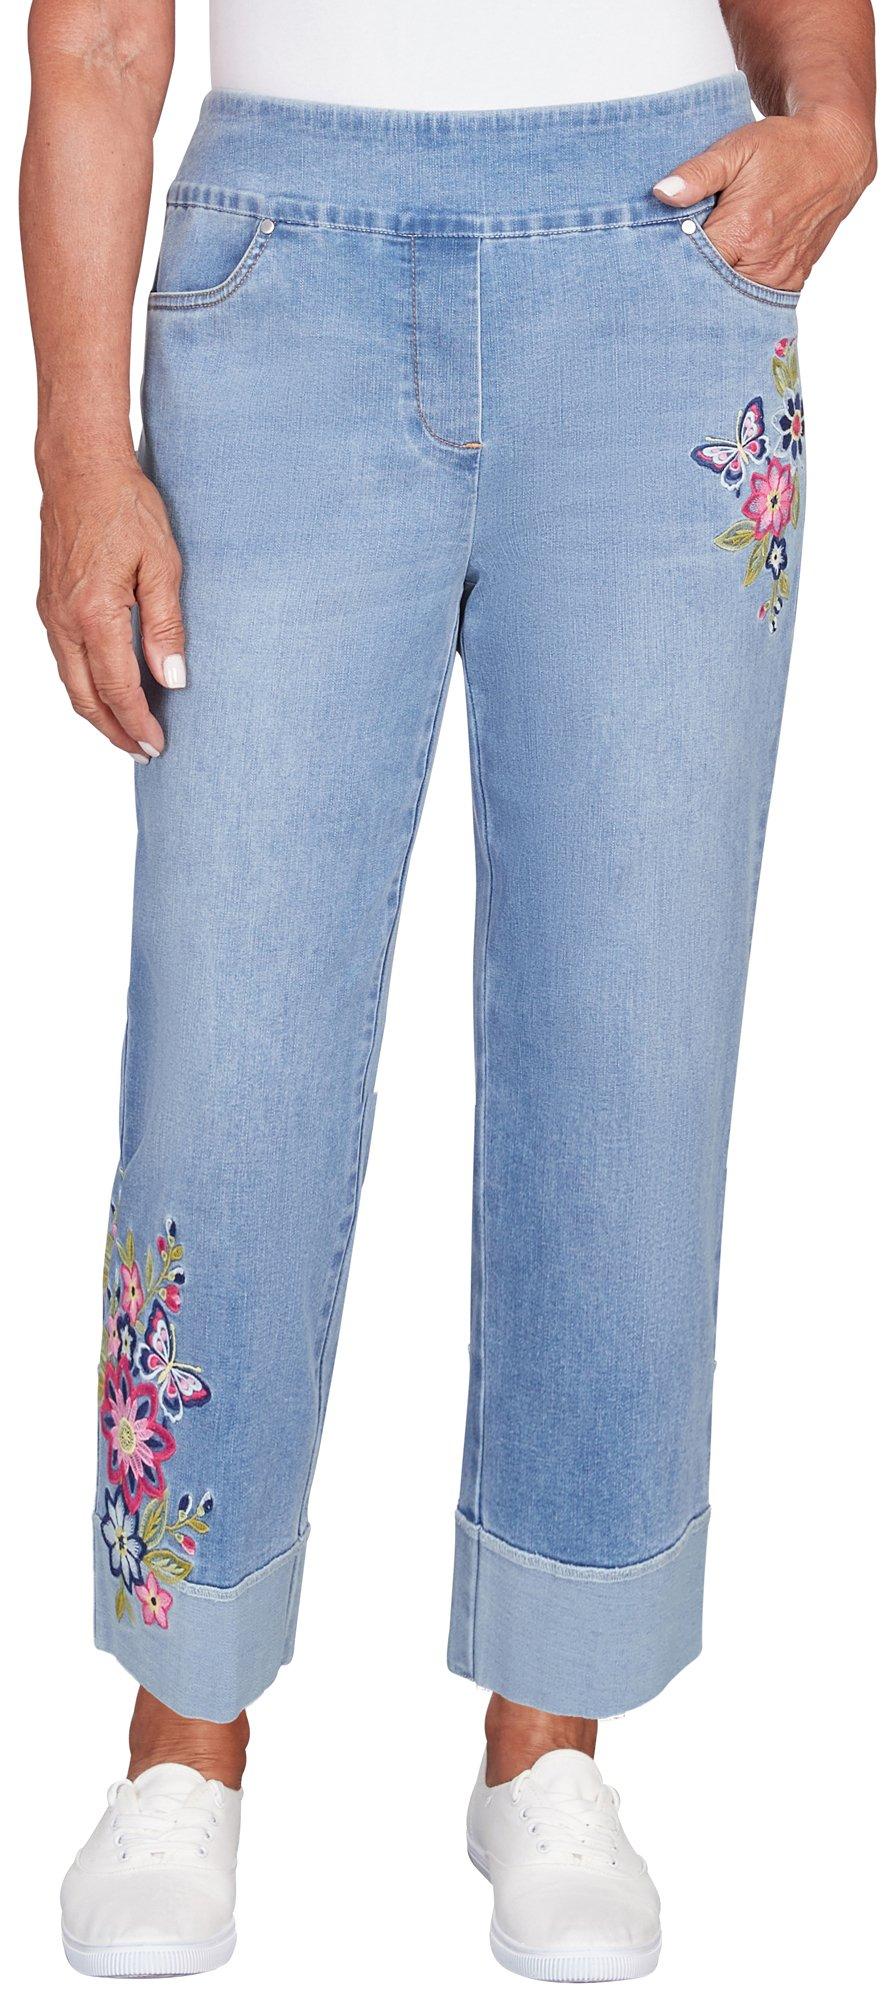 Womens 21 in.Butterfly Embroidered Capris